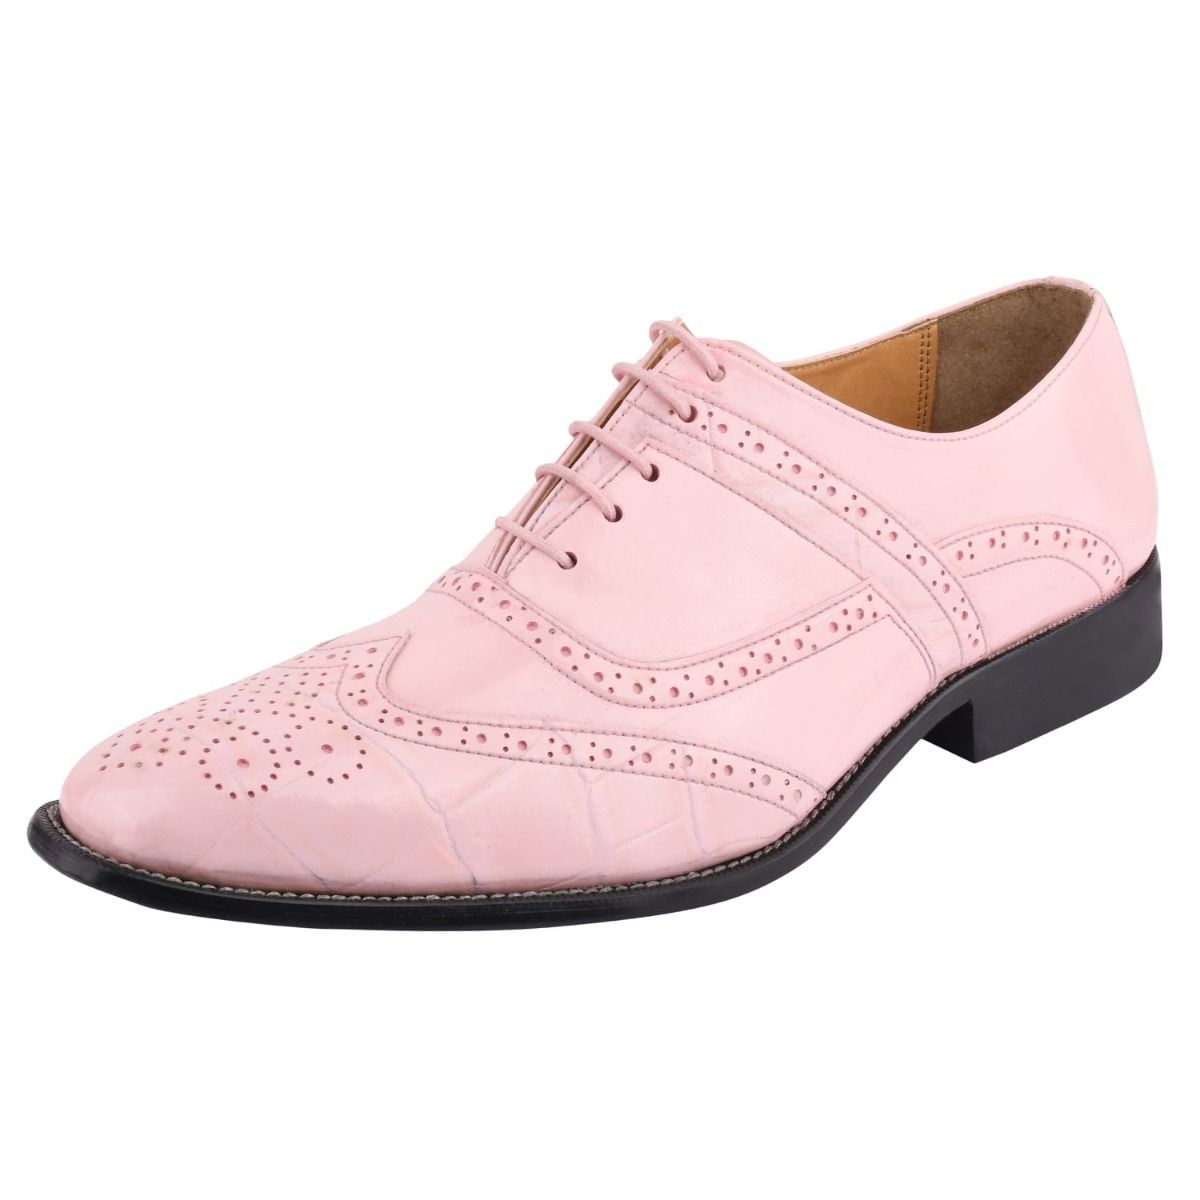 pink prom shoes for men